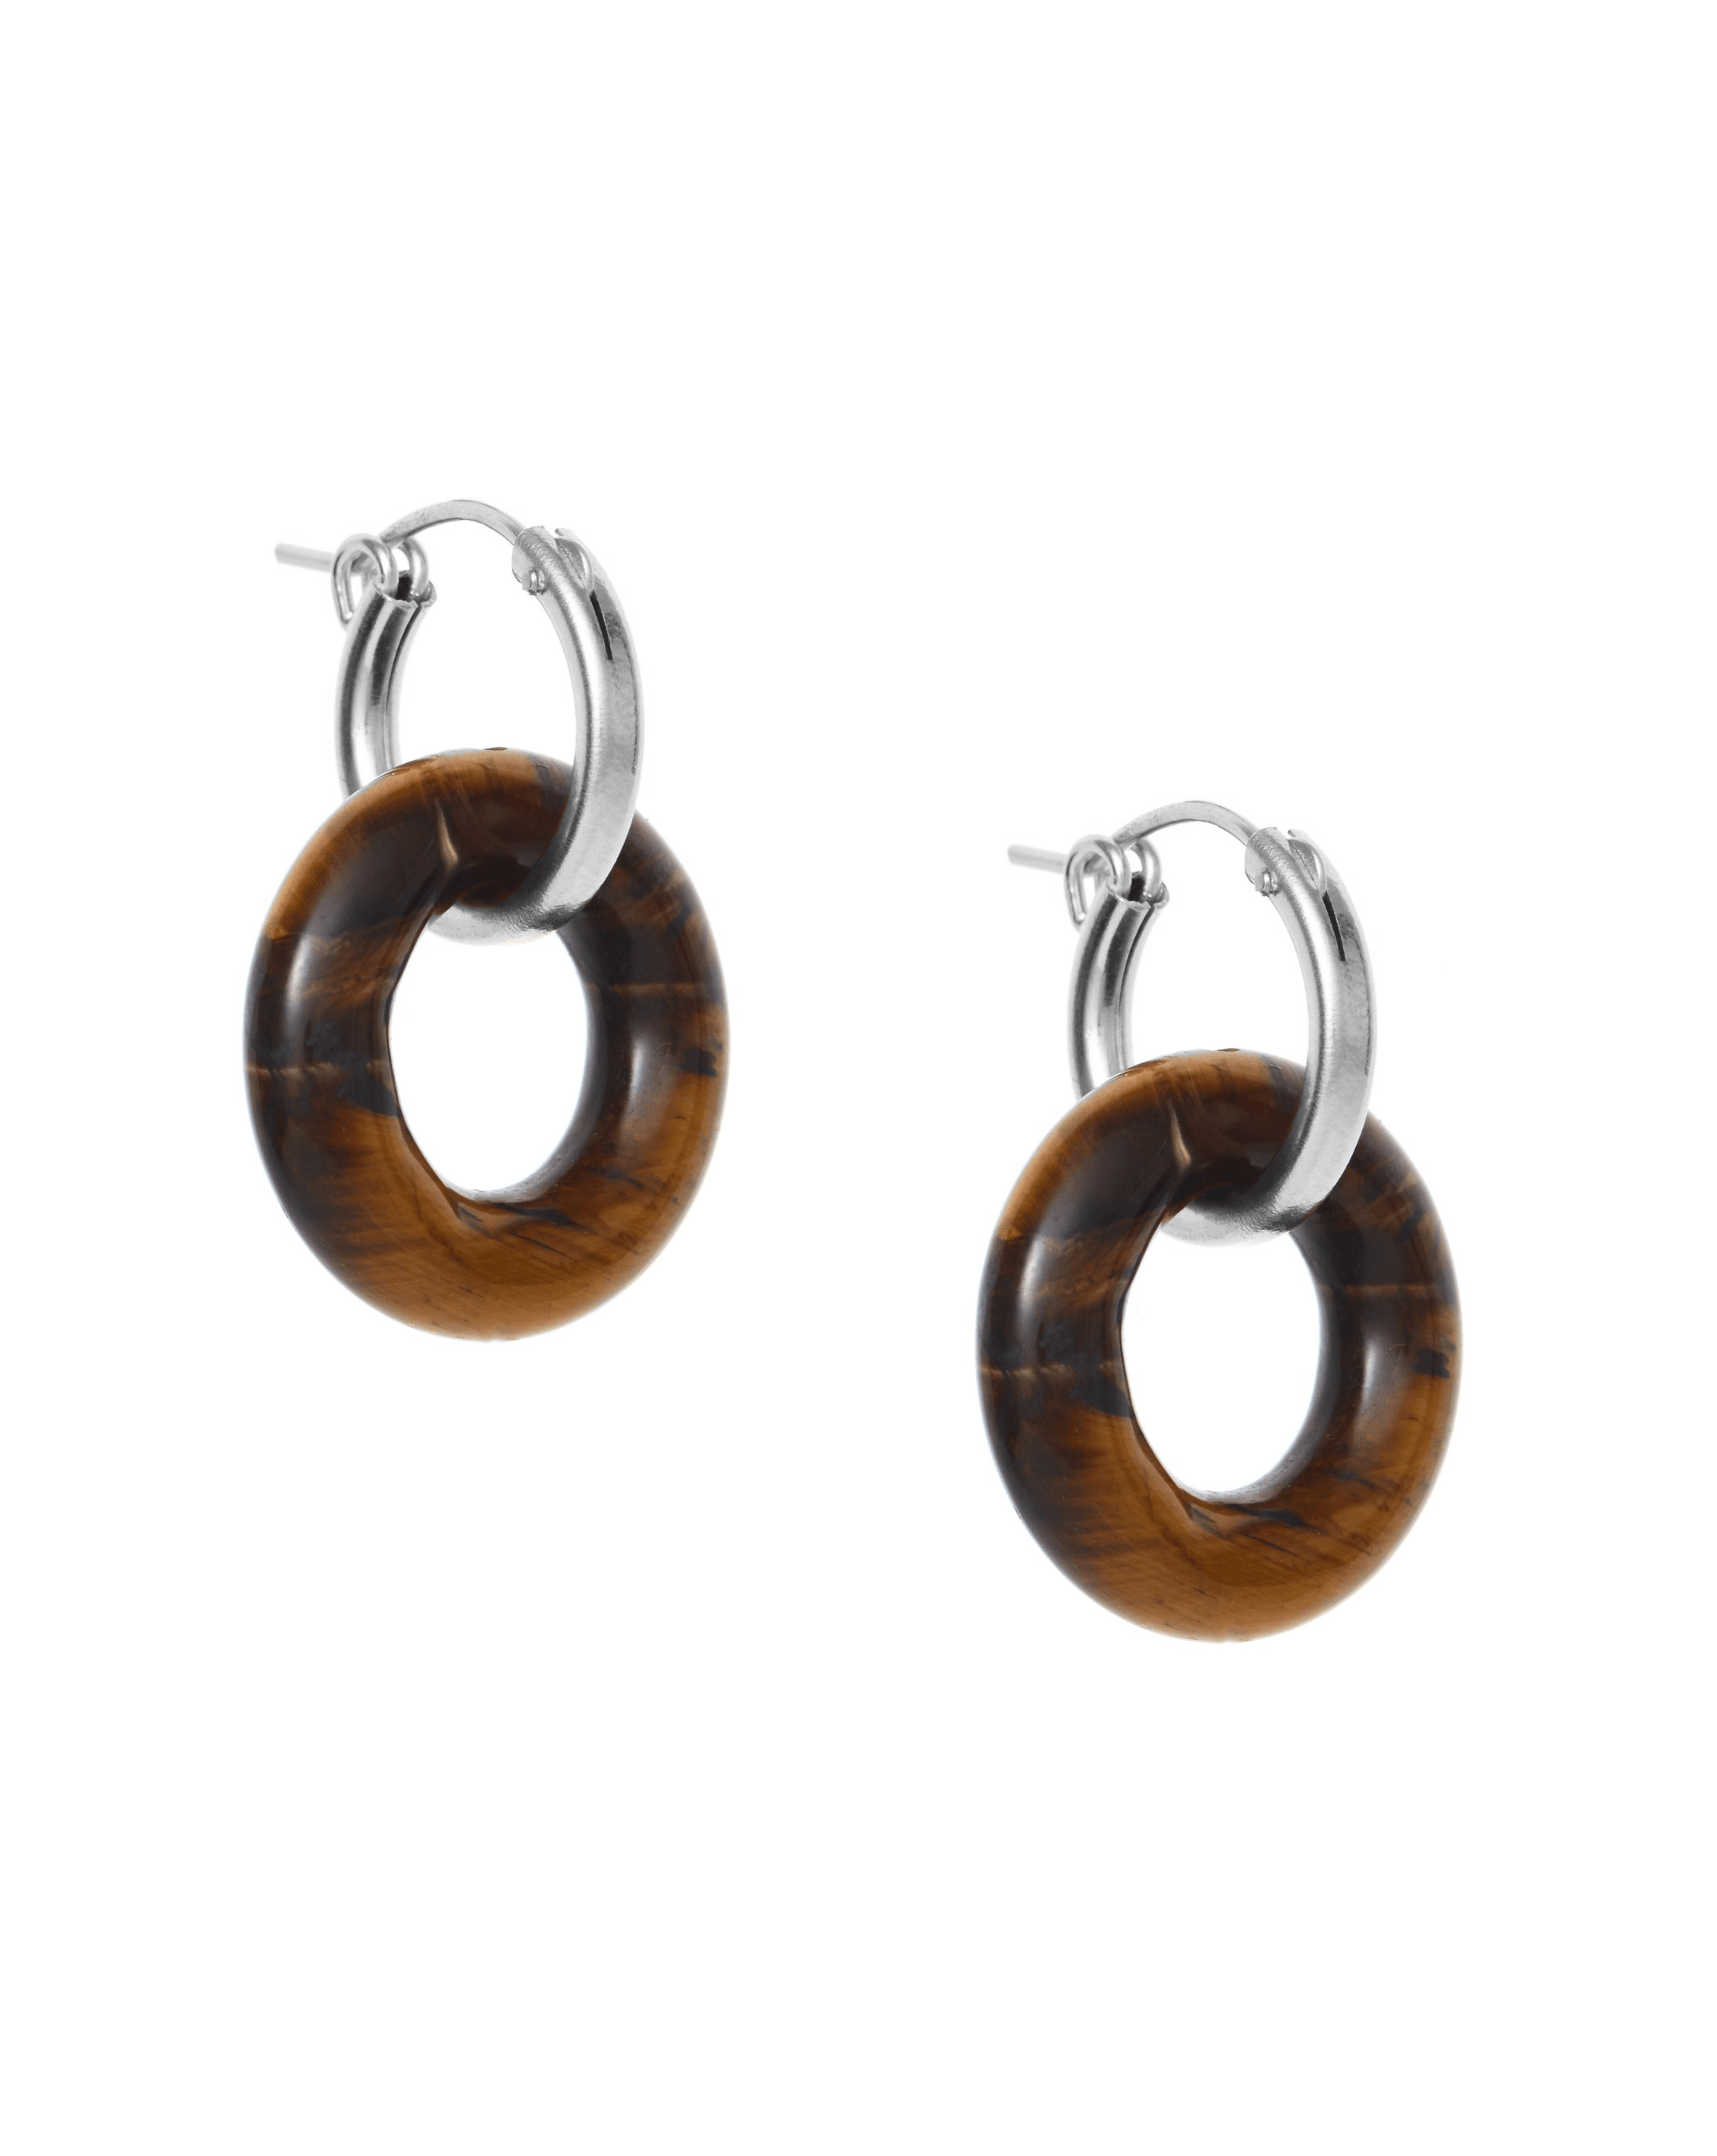 Cerceau Hoops by Kozakh. 15mm hoop earrings with snap closure, crafted in Sterling Silver, featuring a doughnut shape Tiger's Eye gemstone.